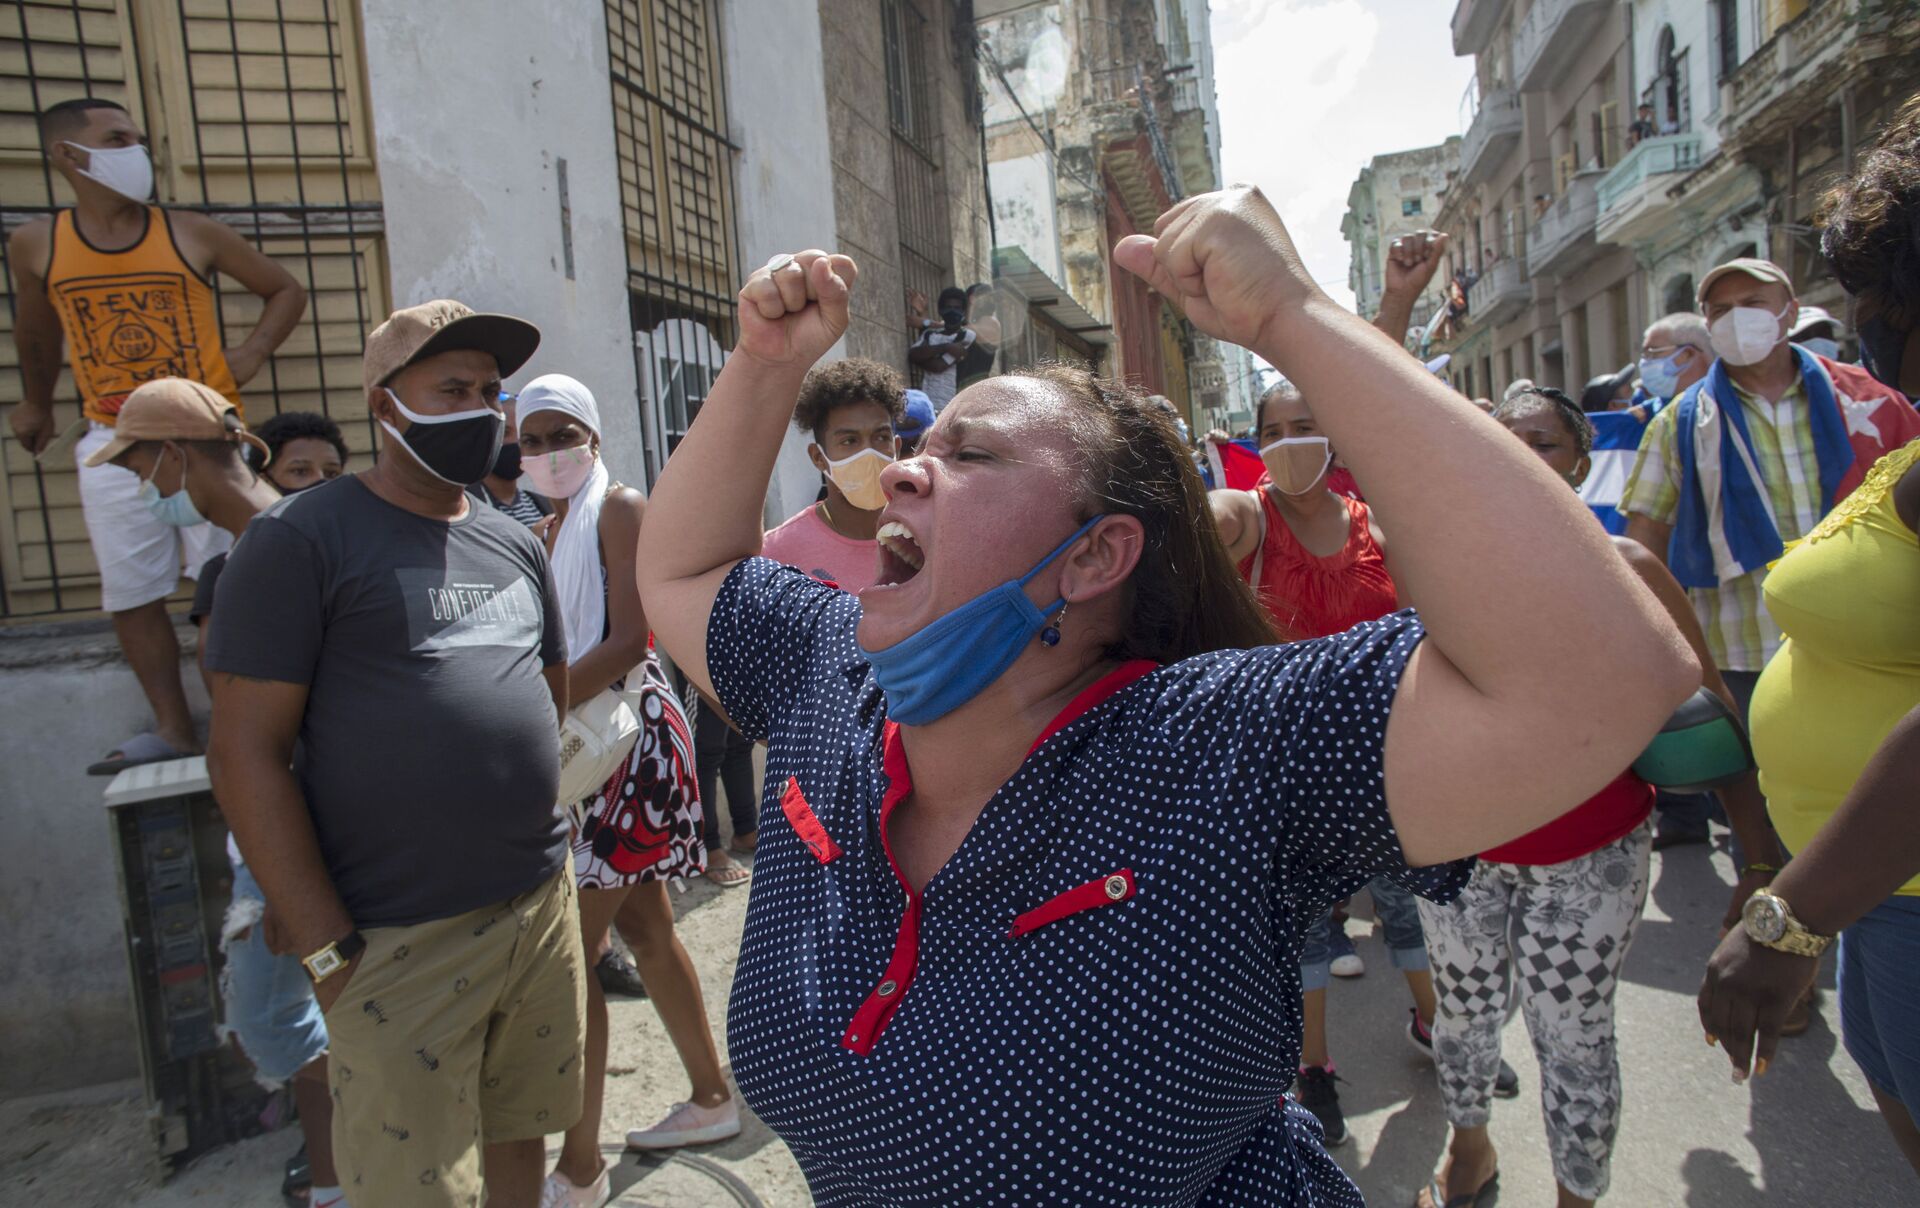 A woman shouts pro-government slogans as anti-government protesters march in Havana, Cuba, Sunday, July 11, 2021 - Sputnik International, 1920, 07.09.2021